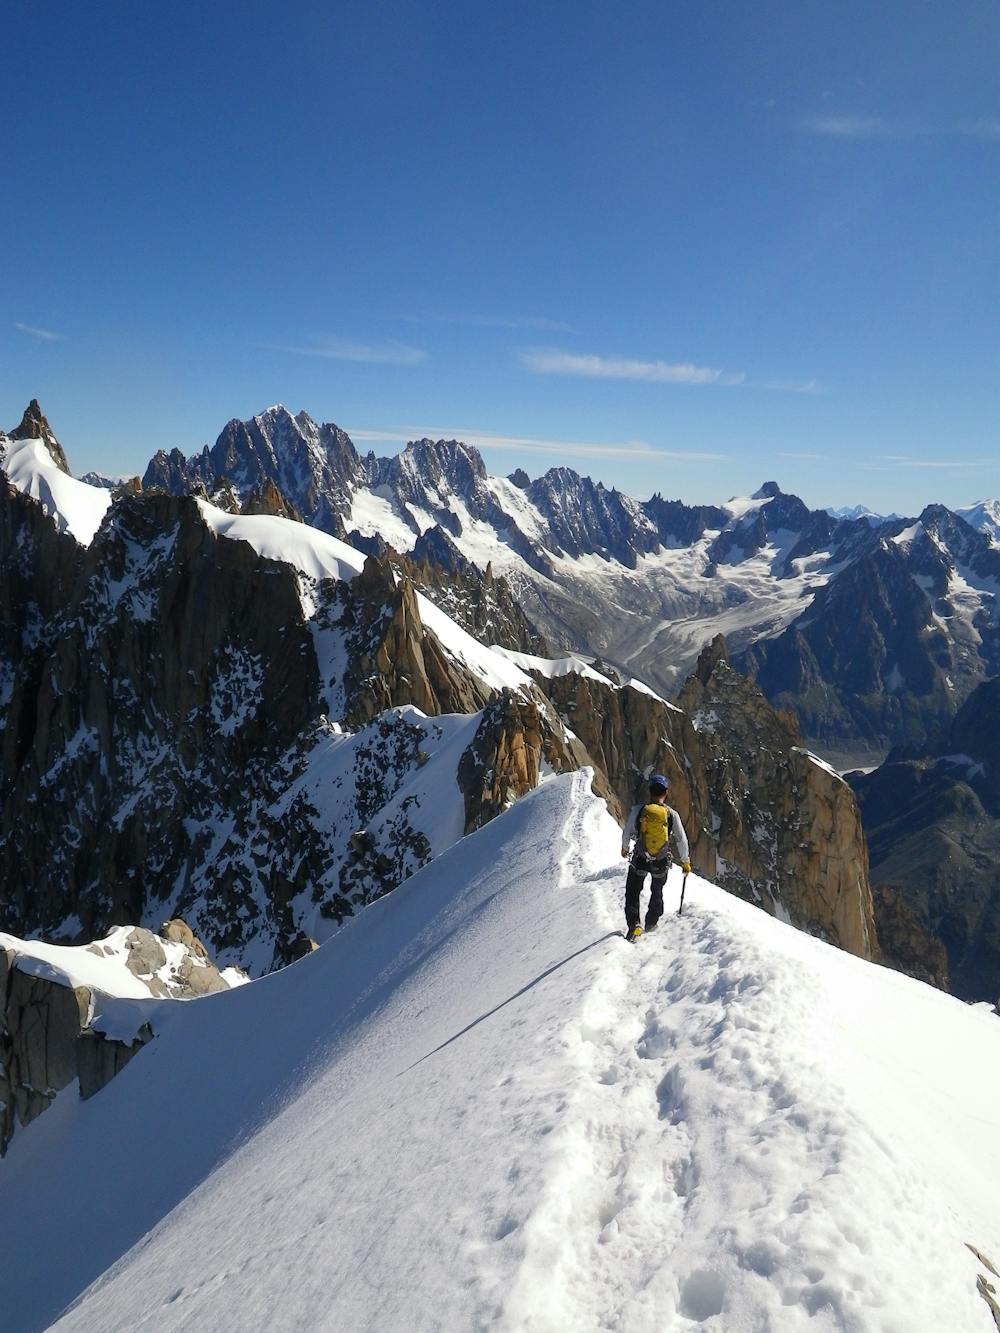 Beginning the route, just after the foot of the Aiguille du Midi arête.